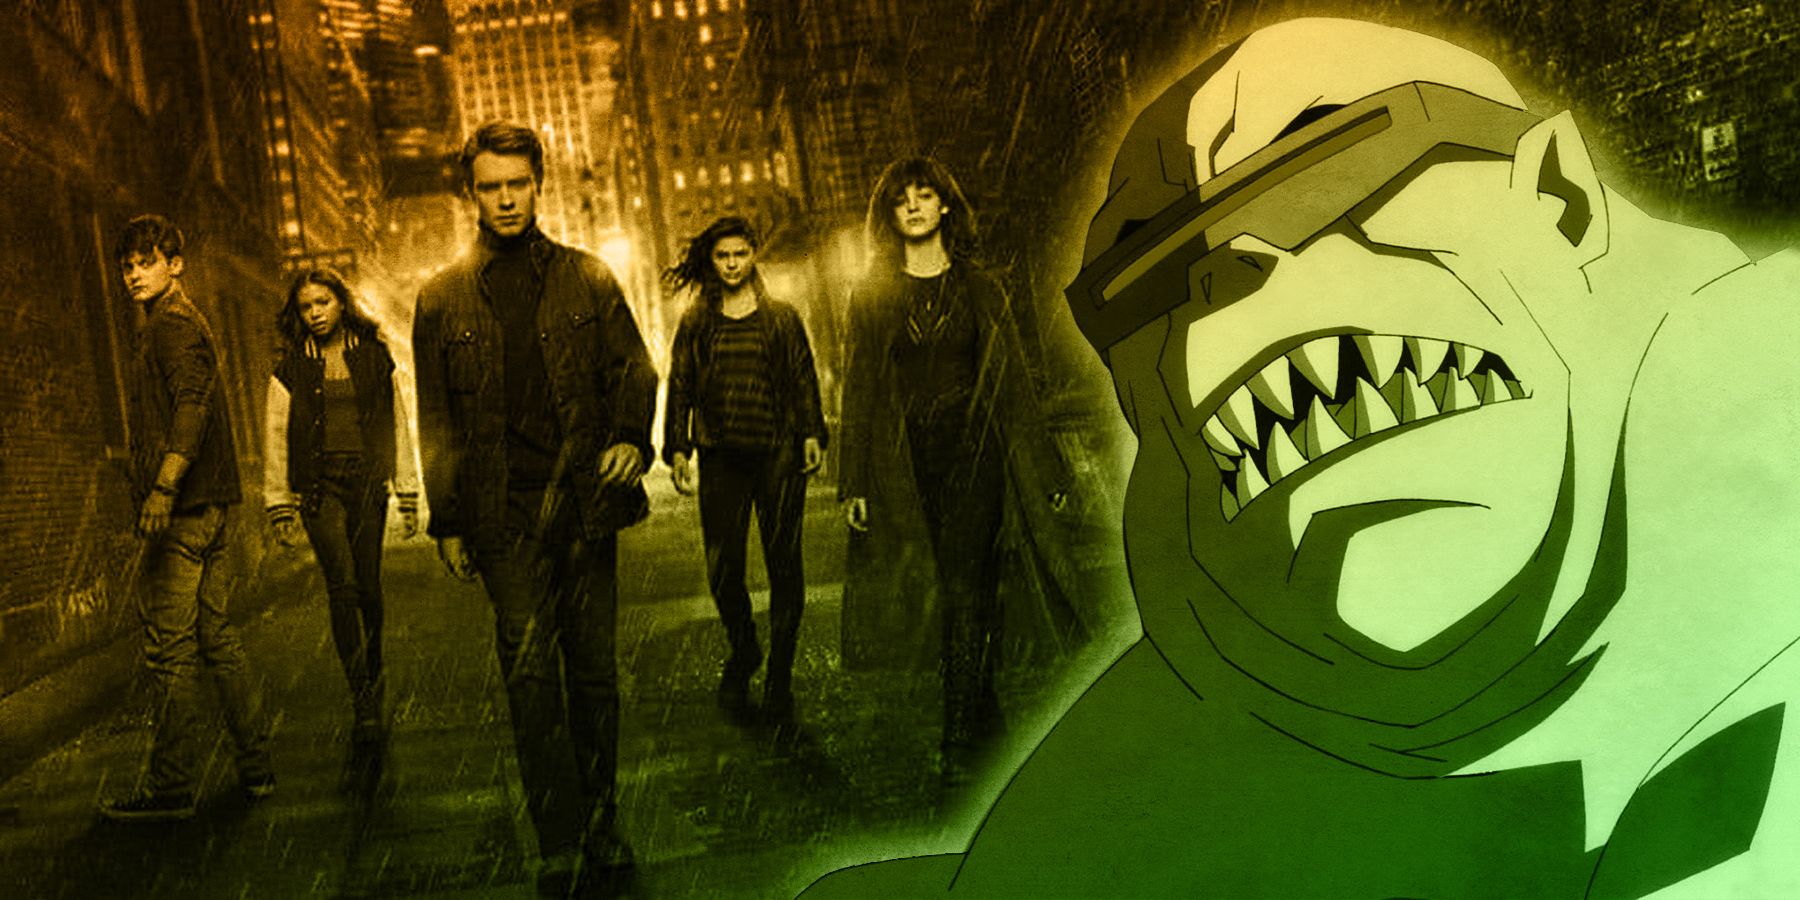 On the left, the Gotham Knights walk through the rainy streets of Gotham in casual attire. On the right, a close-up of the Mutant Leader bares his sharp teeth.